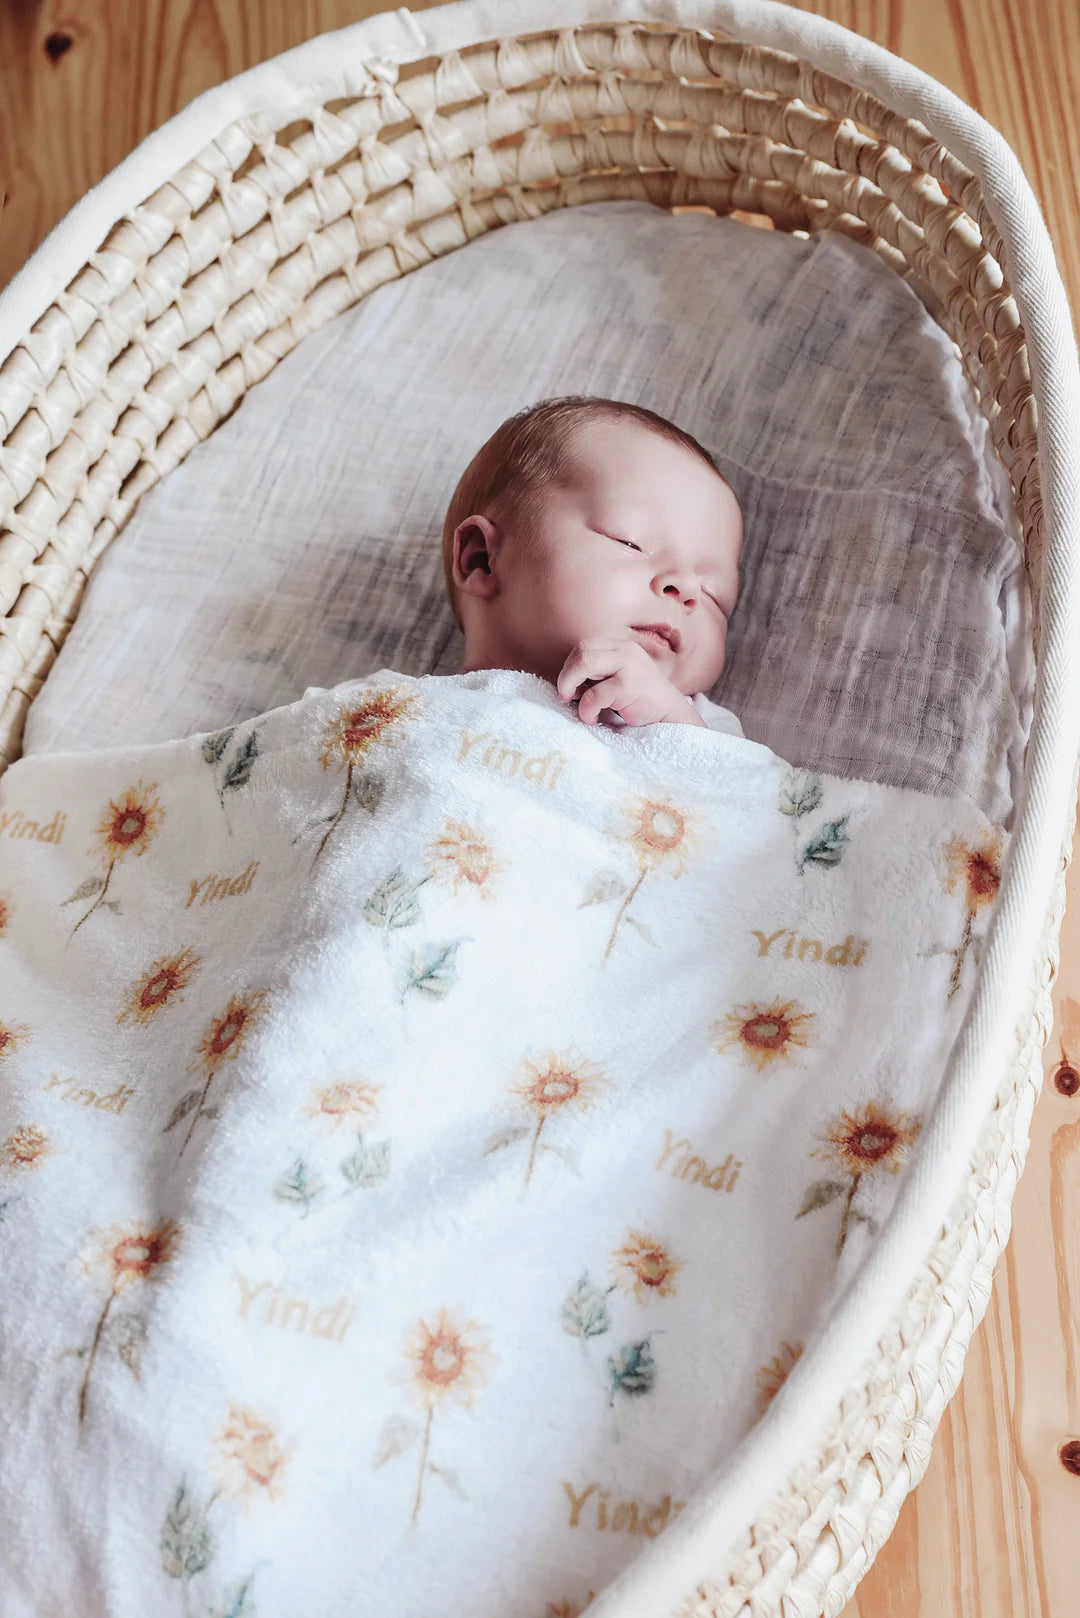 Personalised Baby Blankets: Wrap Them in Love